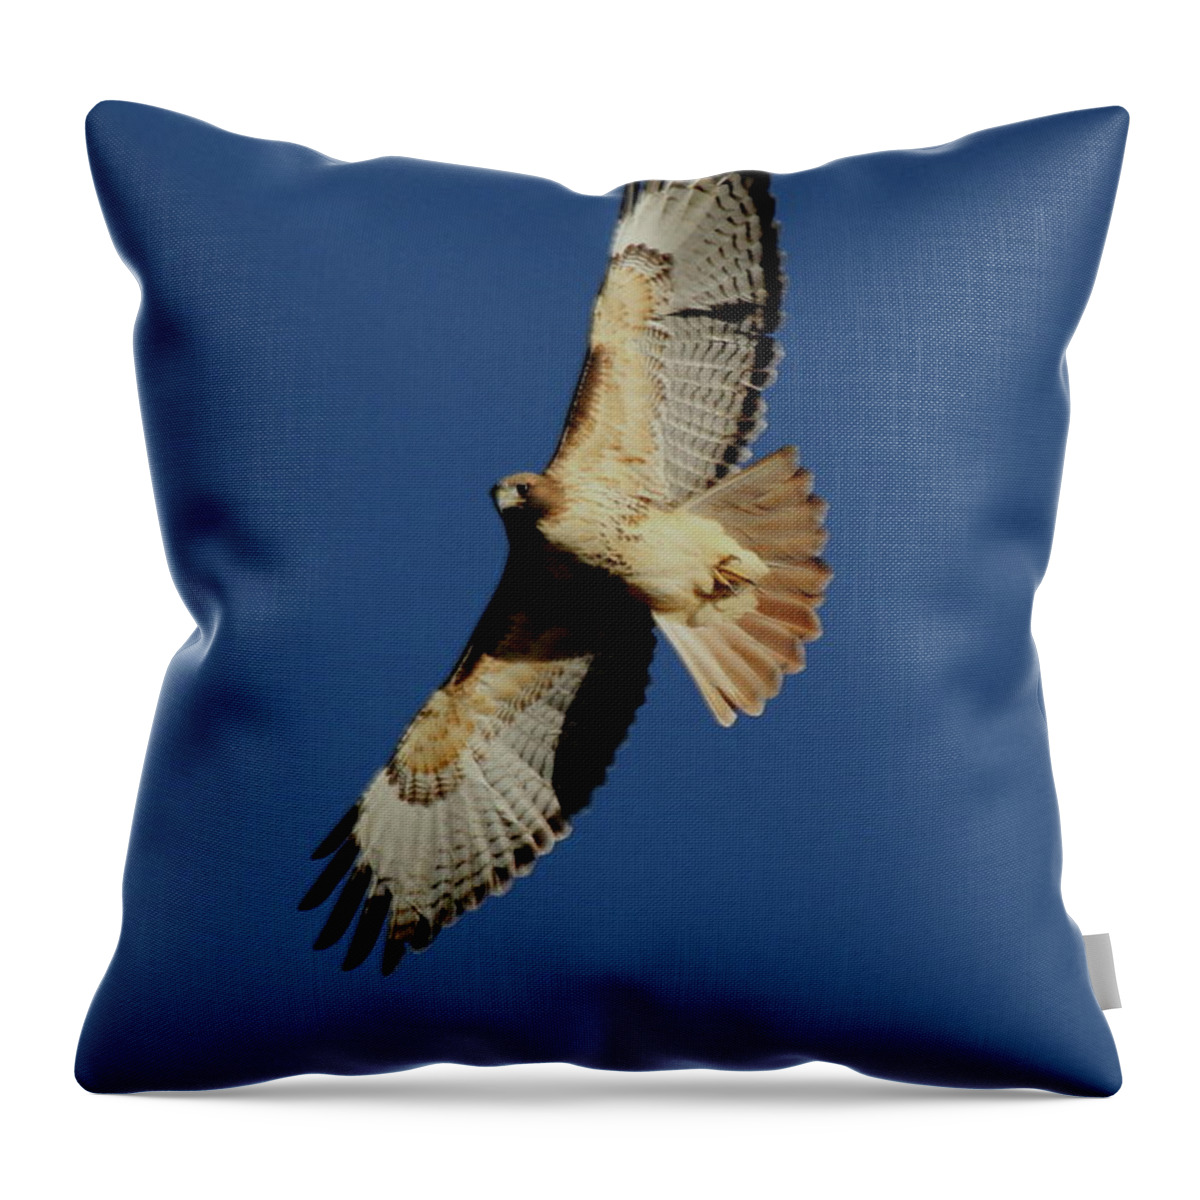 Red Throw Pillow featuring the photograph Eye Contact by Trent Mallett